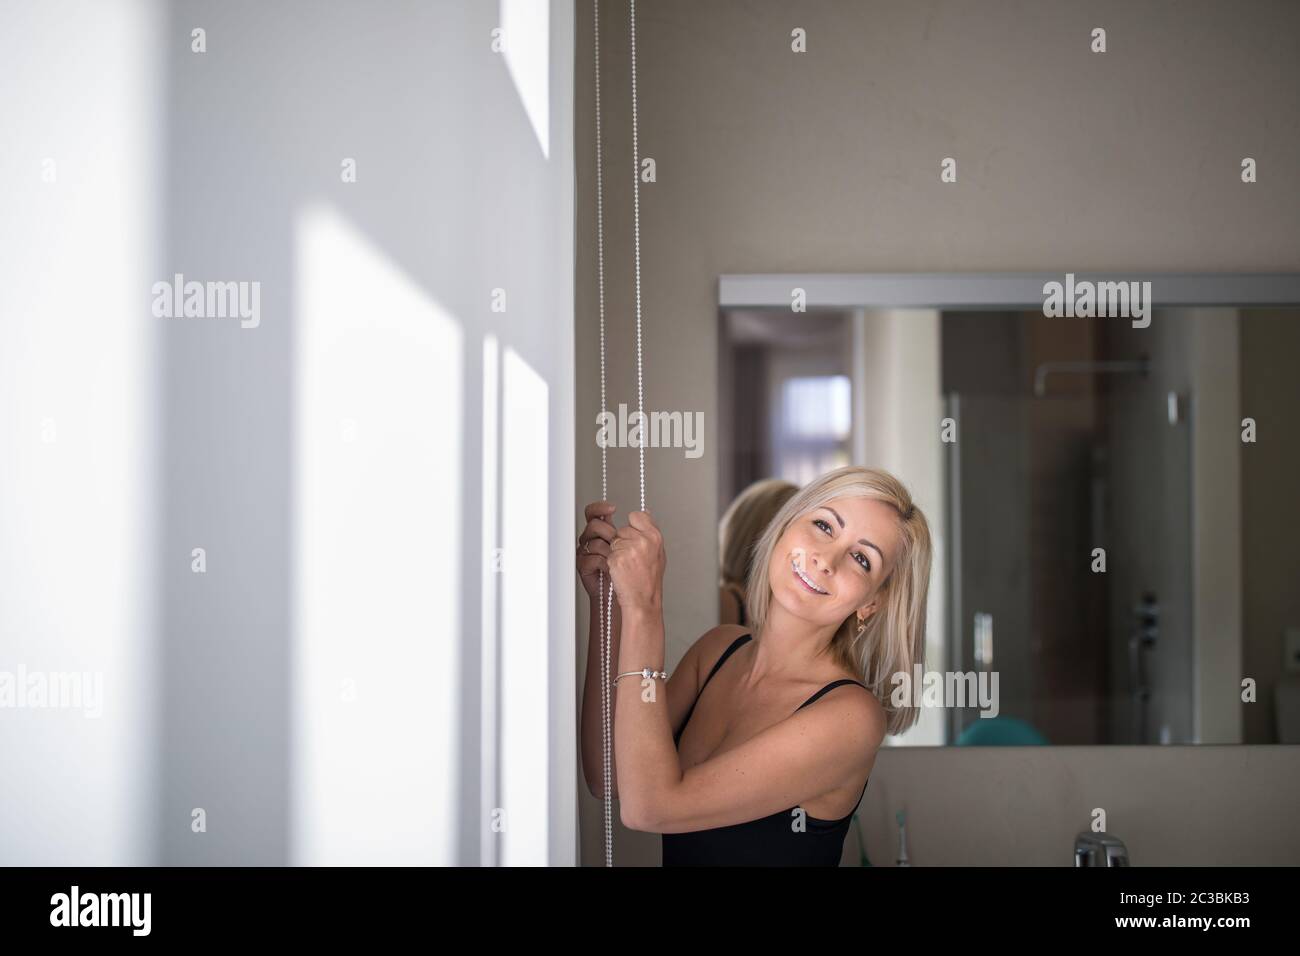 Pretty, young woman lowering the interior shades/blinds in her modern interior apartment Stock Photo